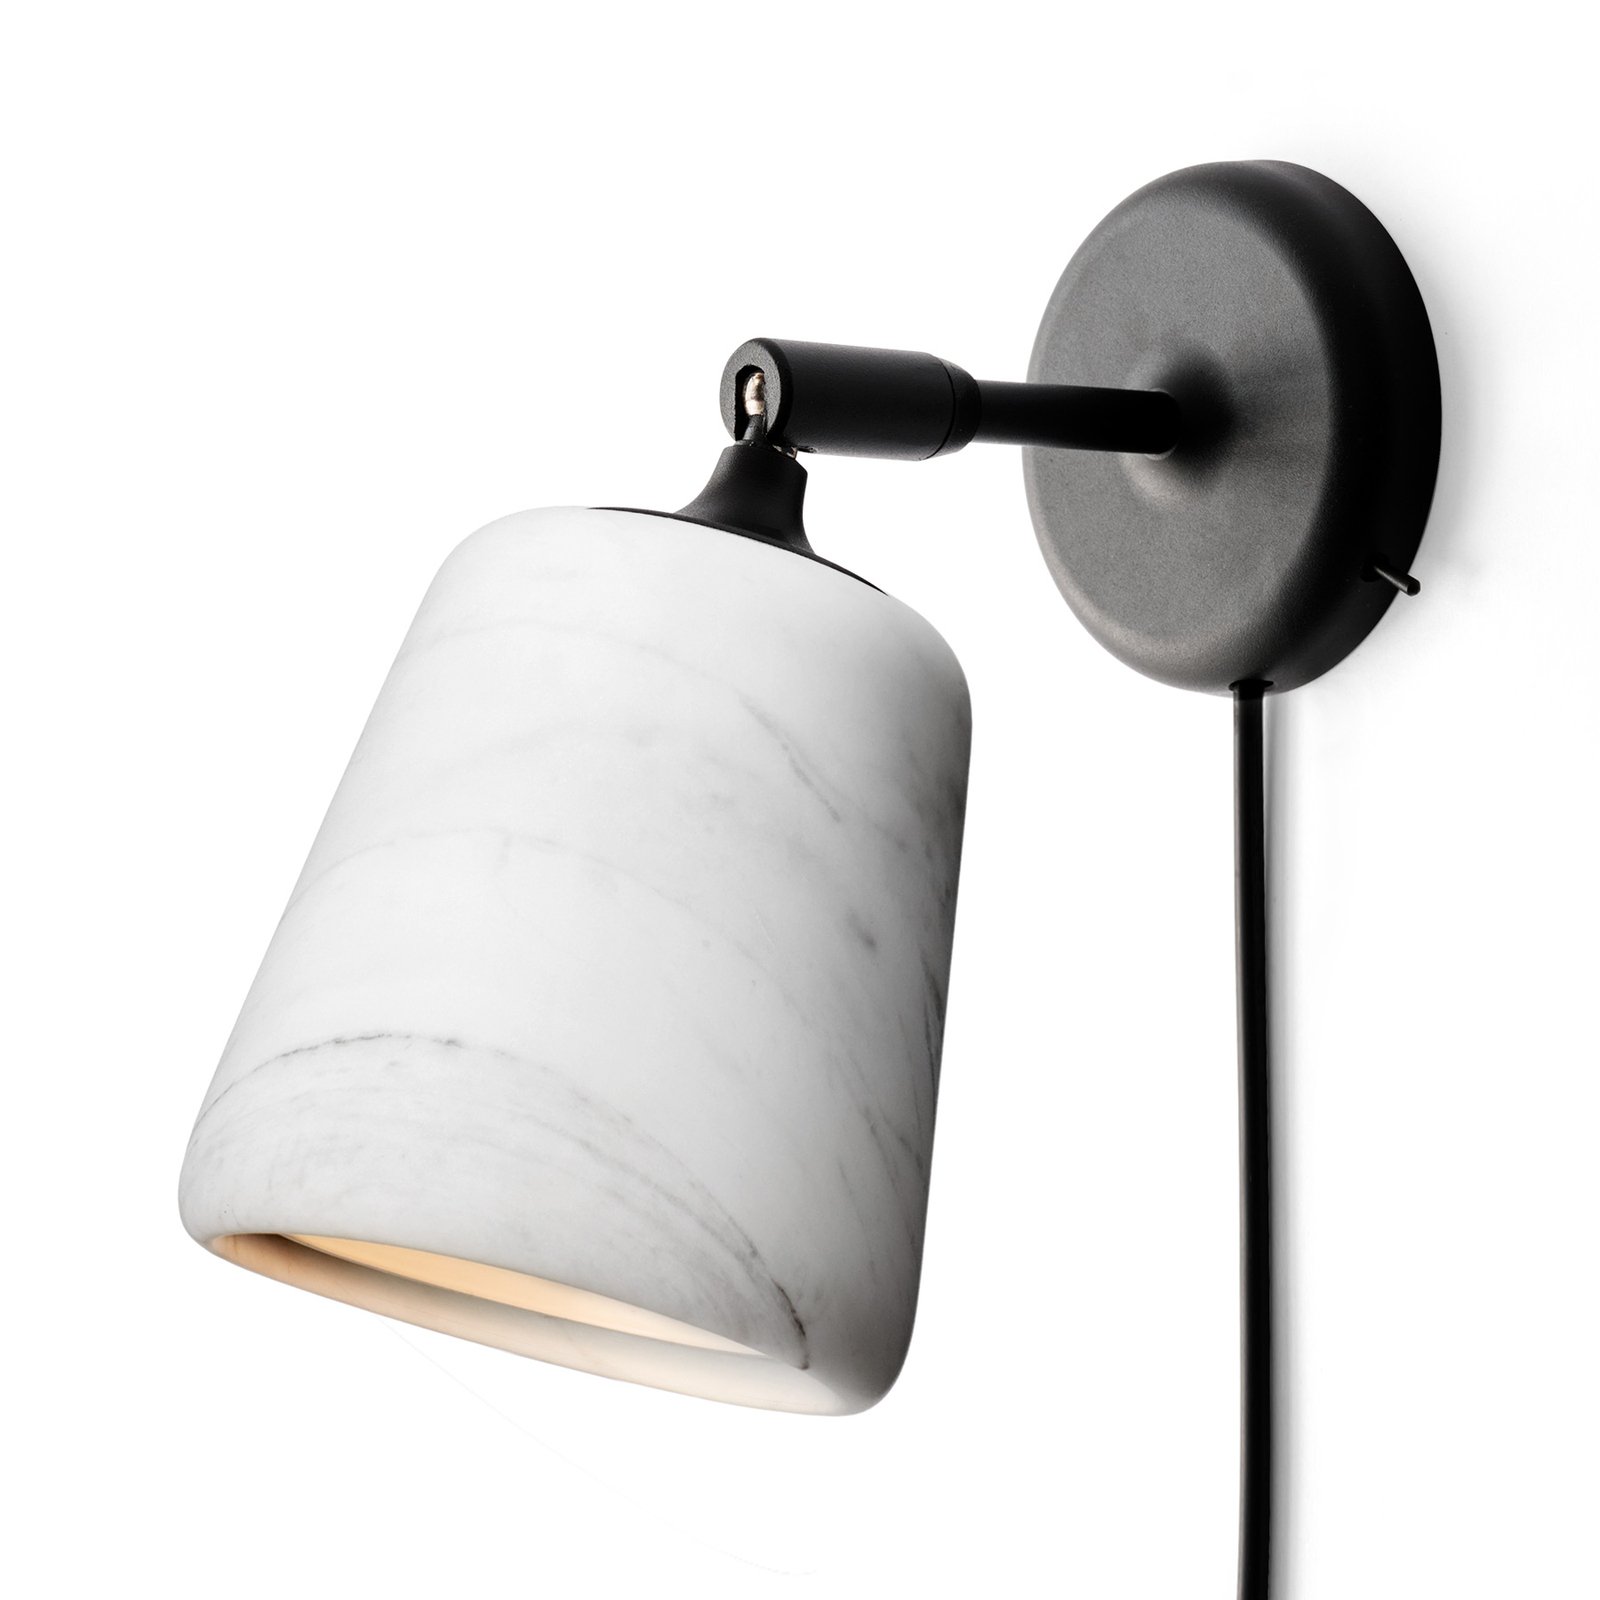 New Works Material New Edition Wandlampe, Marmor